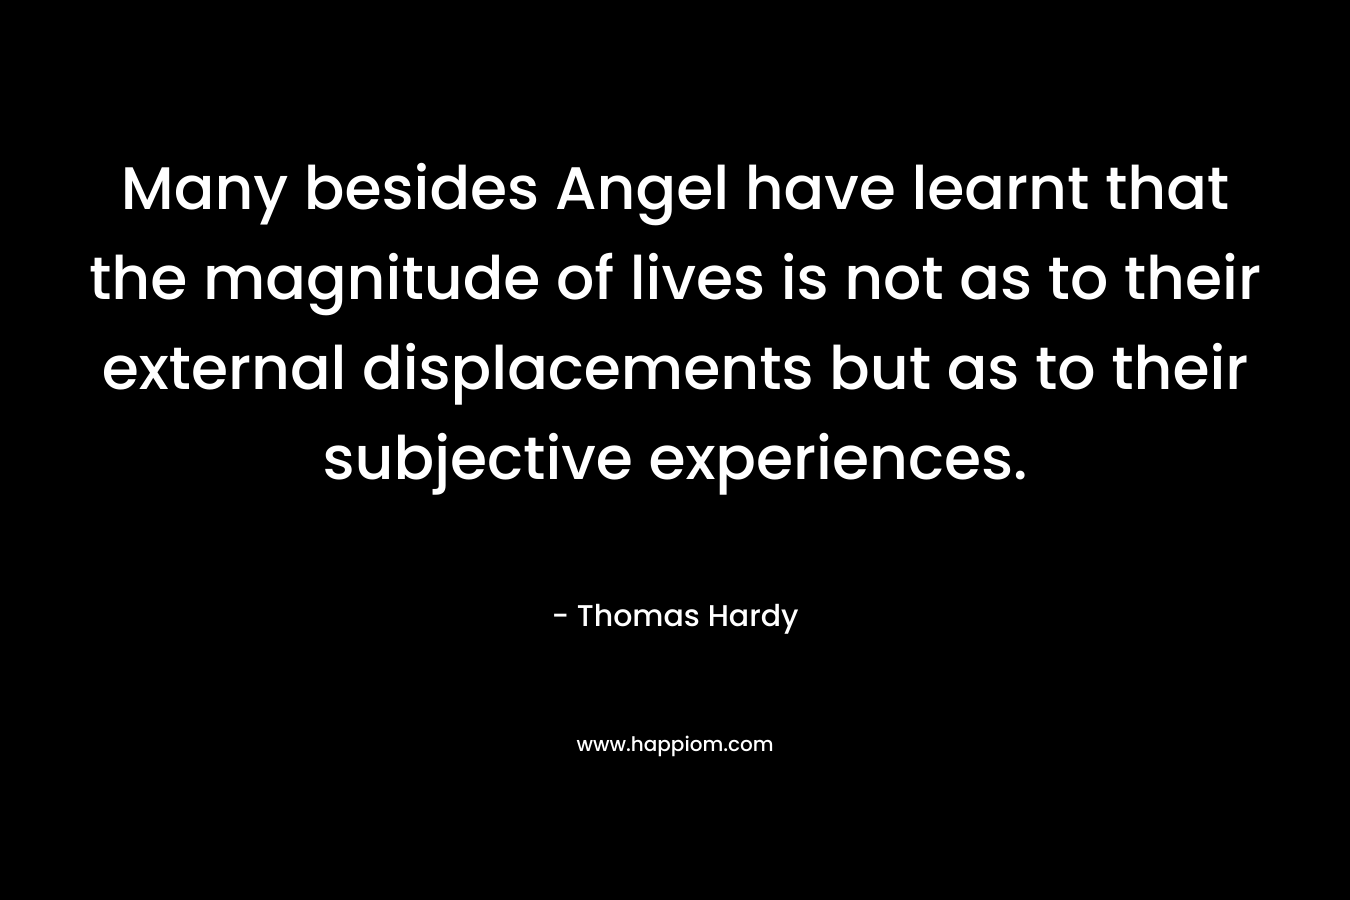 Many besides Angel have learnt that the magnitude of lives is not as to their external displacements but as to their subjective experiences.